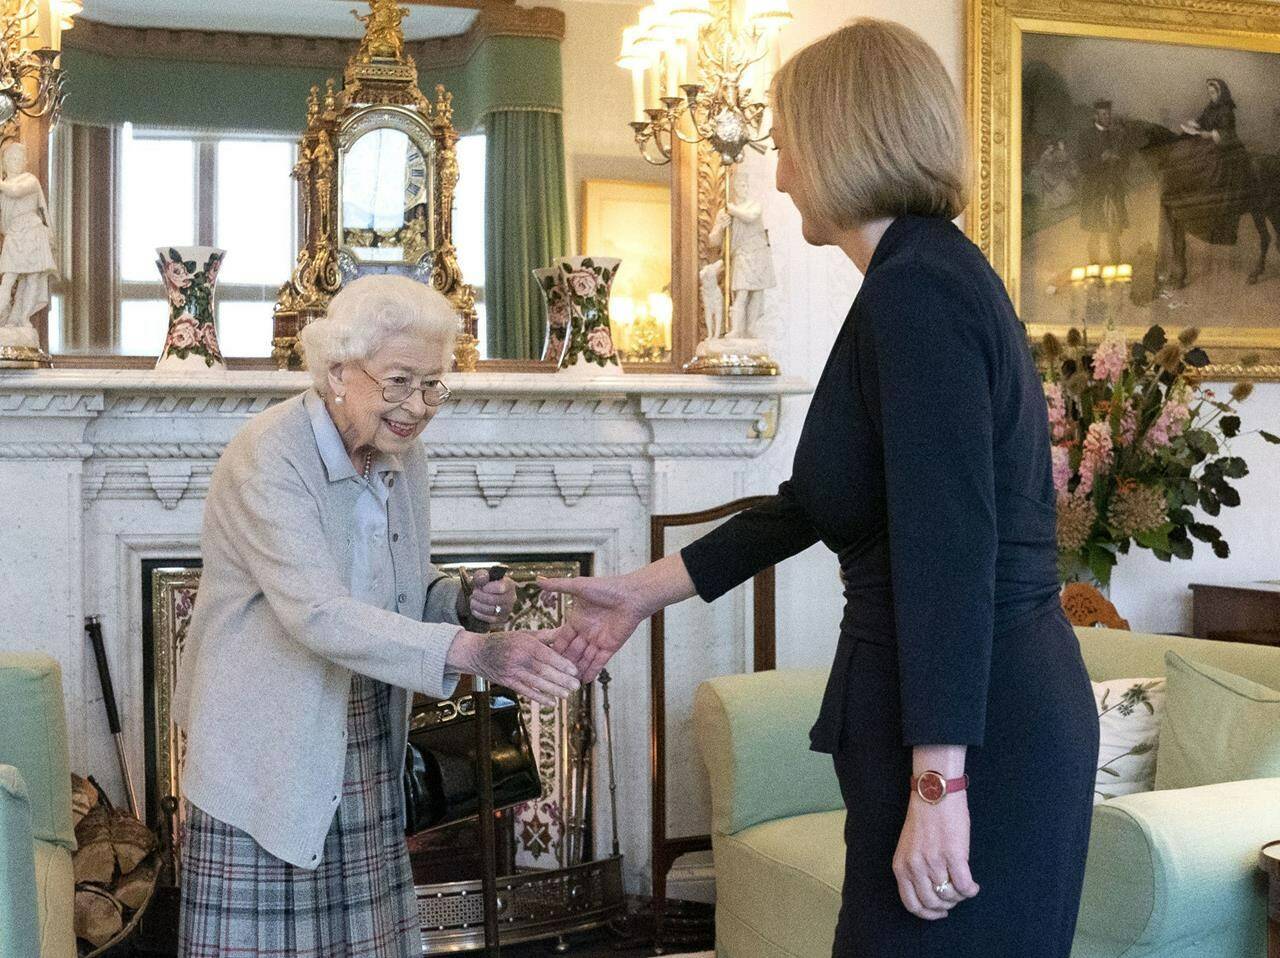 Britain’s Queen Elizabeth II, left, welcomes Liz Truss during an audience at Balmoral, Scotland, where she invited the newly elected leader of the Conservative party to become Prime Minister and form a new government, Tuesday, Sept. 6, 2022.THE CANADIAN PRESS/AP-Jane Barlow/Pool Photo via AP